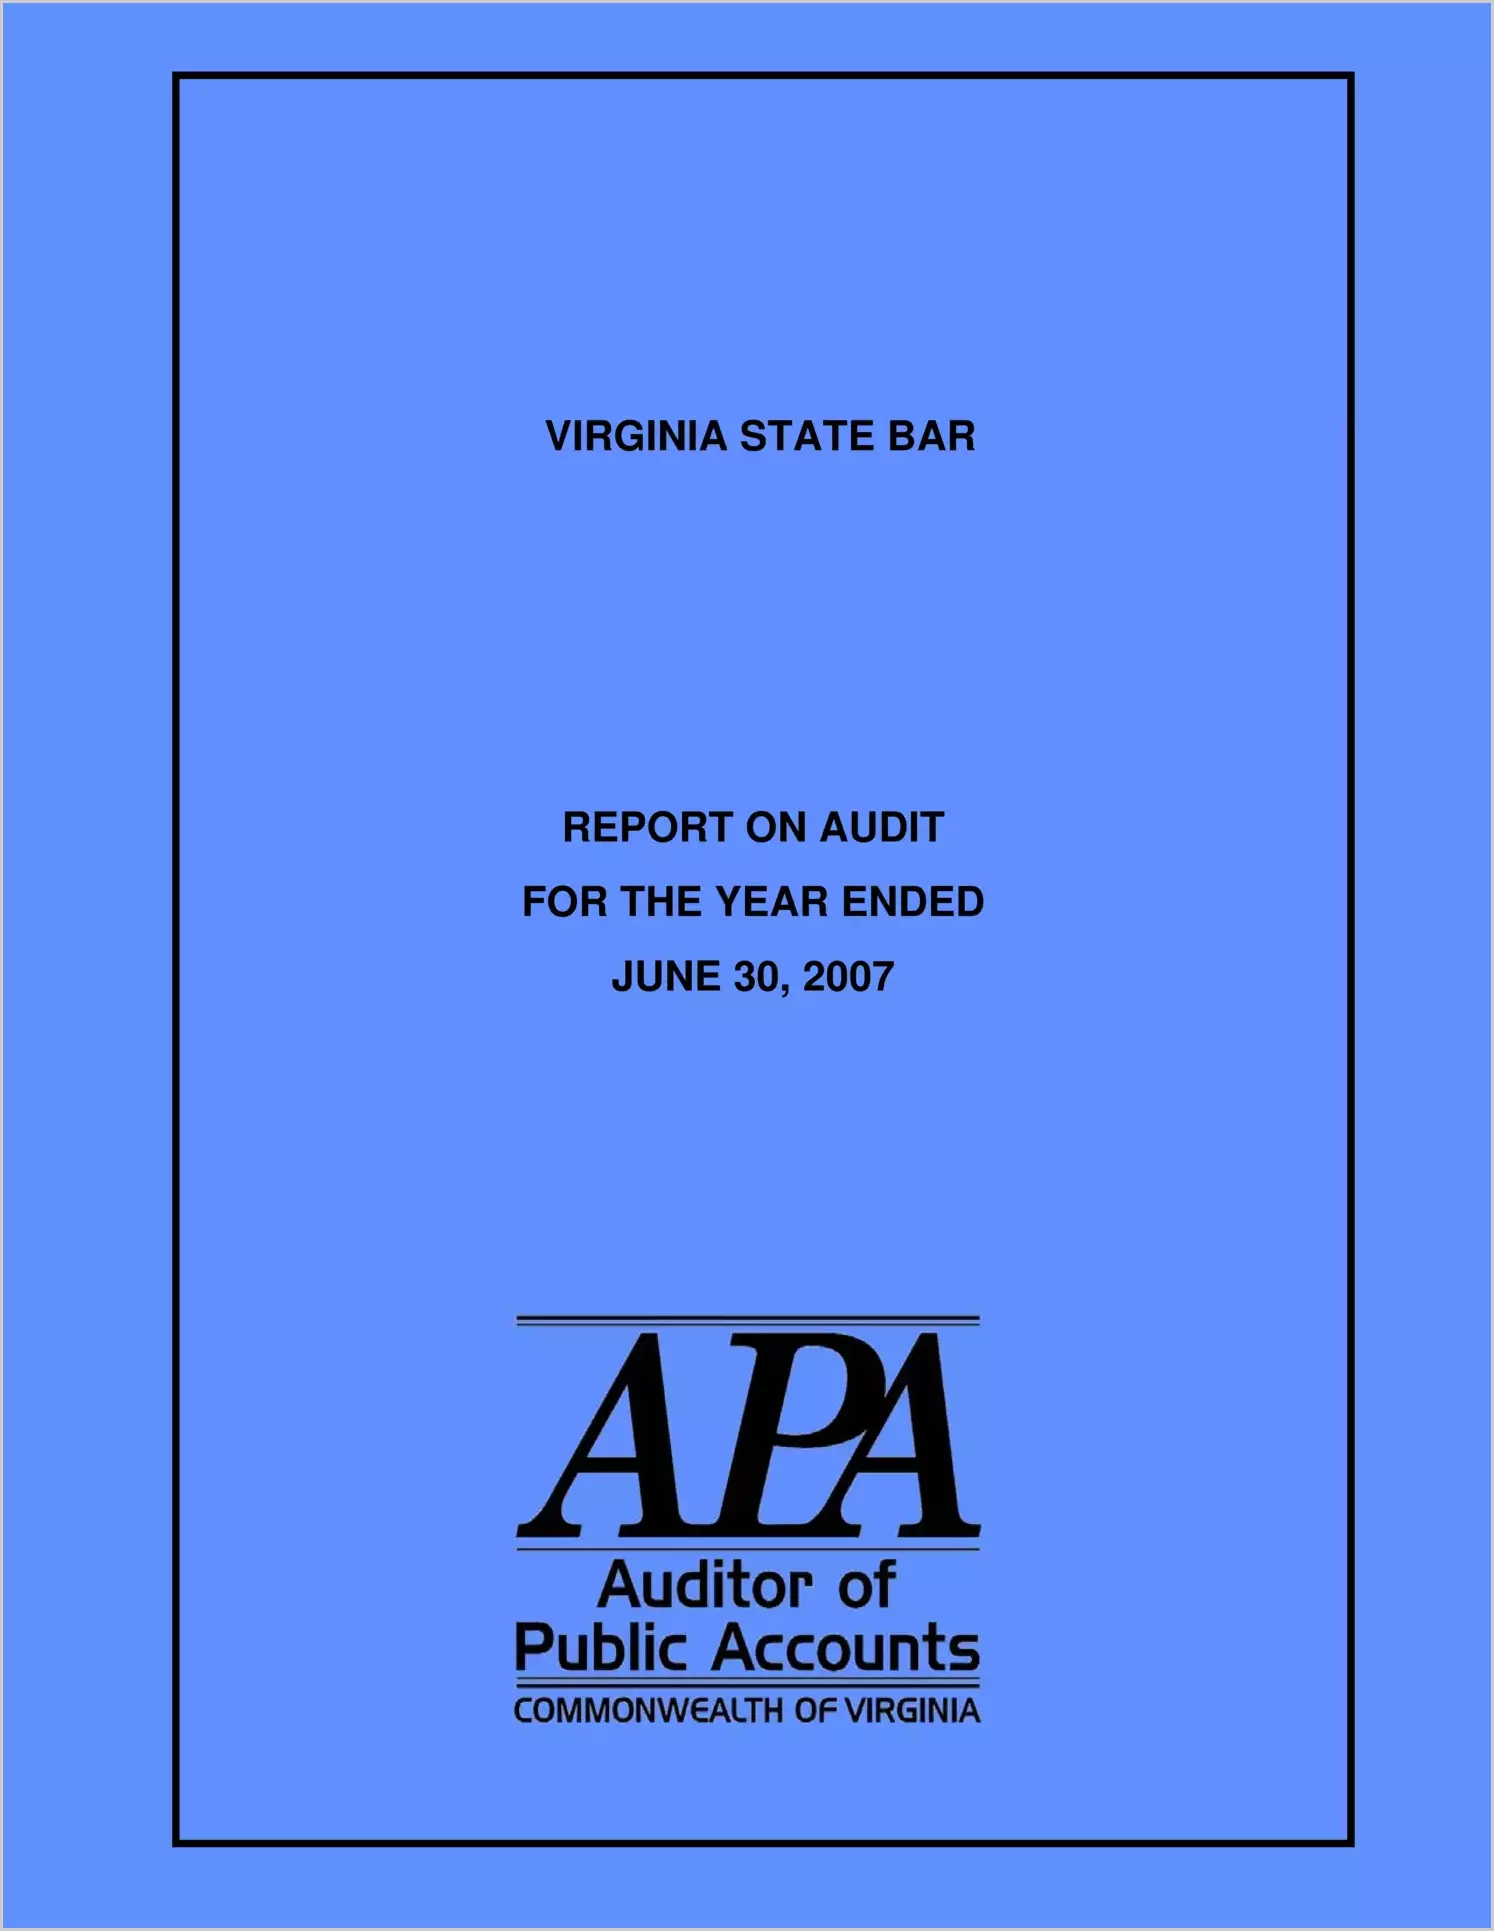 Virginia State Bar for the year ended June 30, 2007